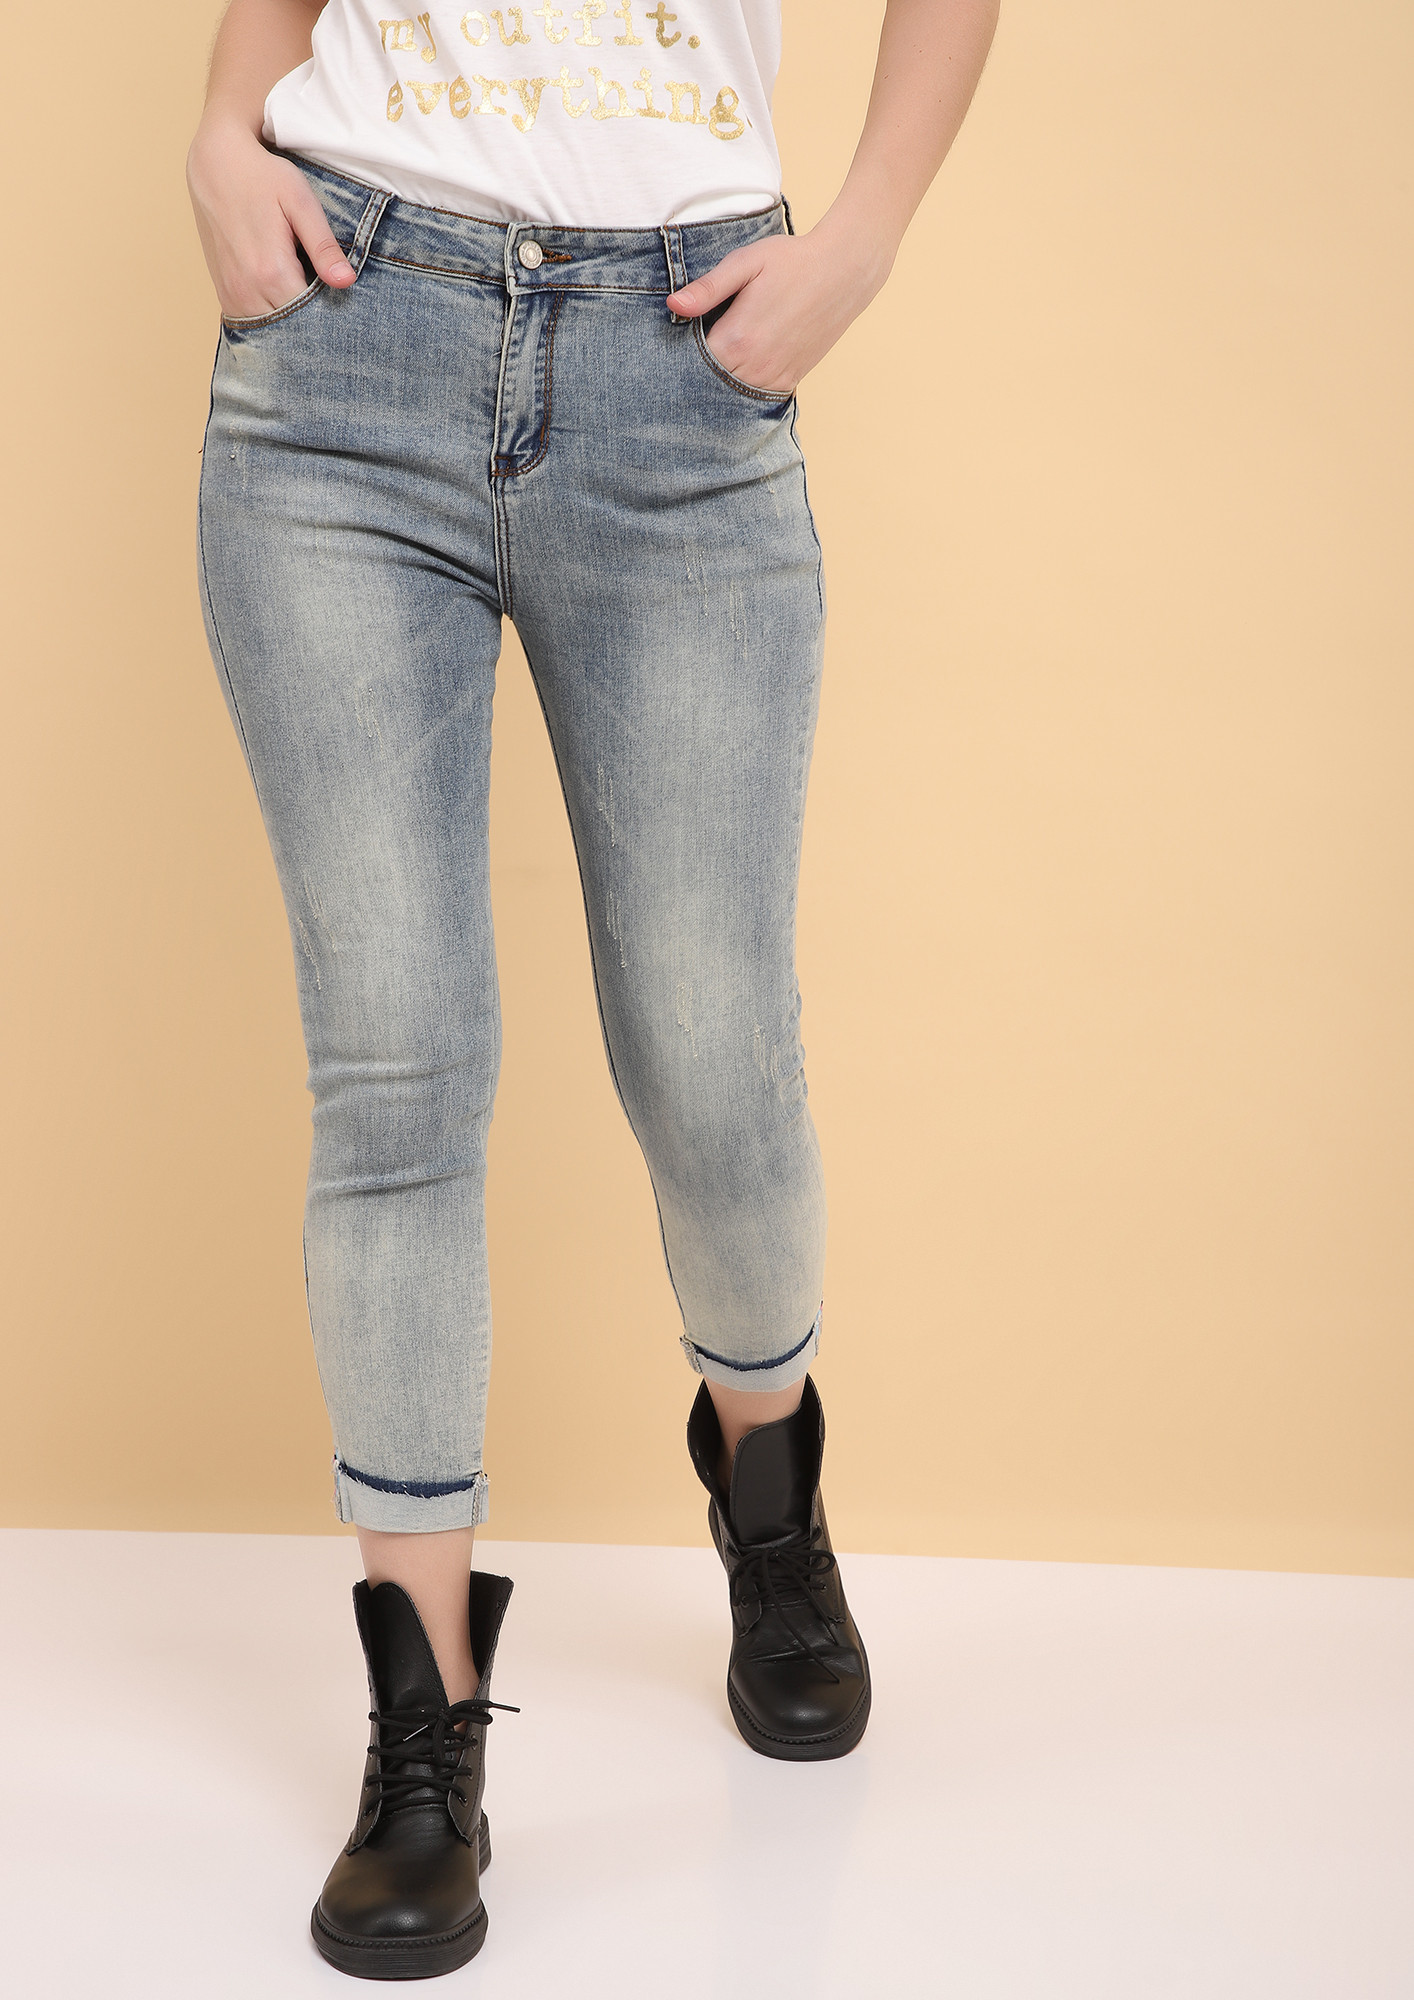 COOL WITH EVERYTHING BLUE CROPPED JEANS